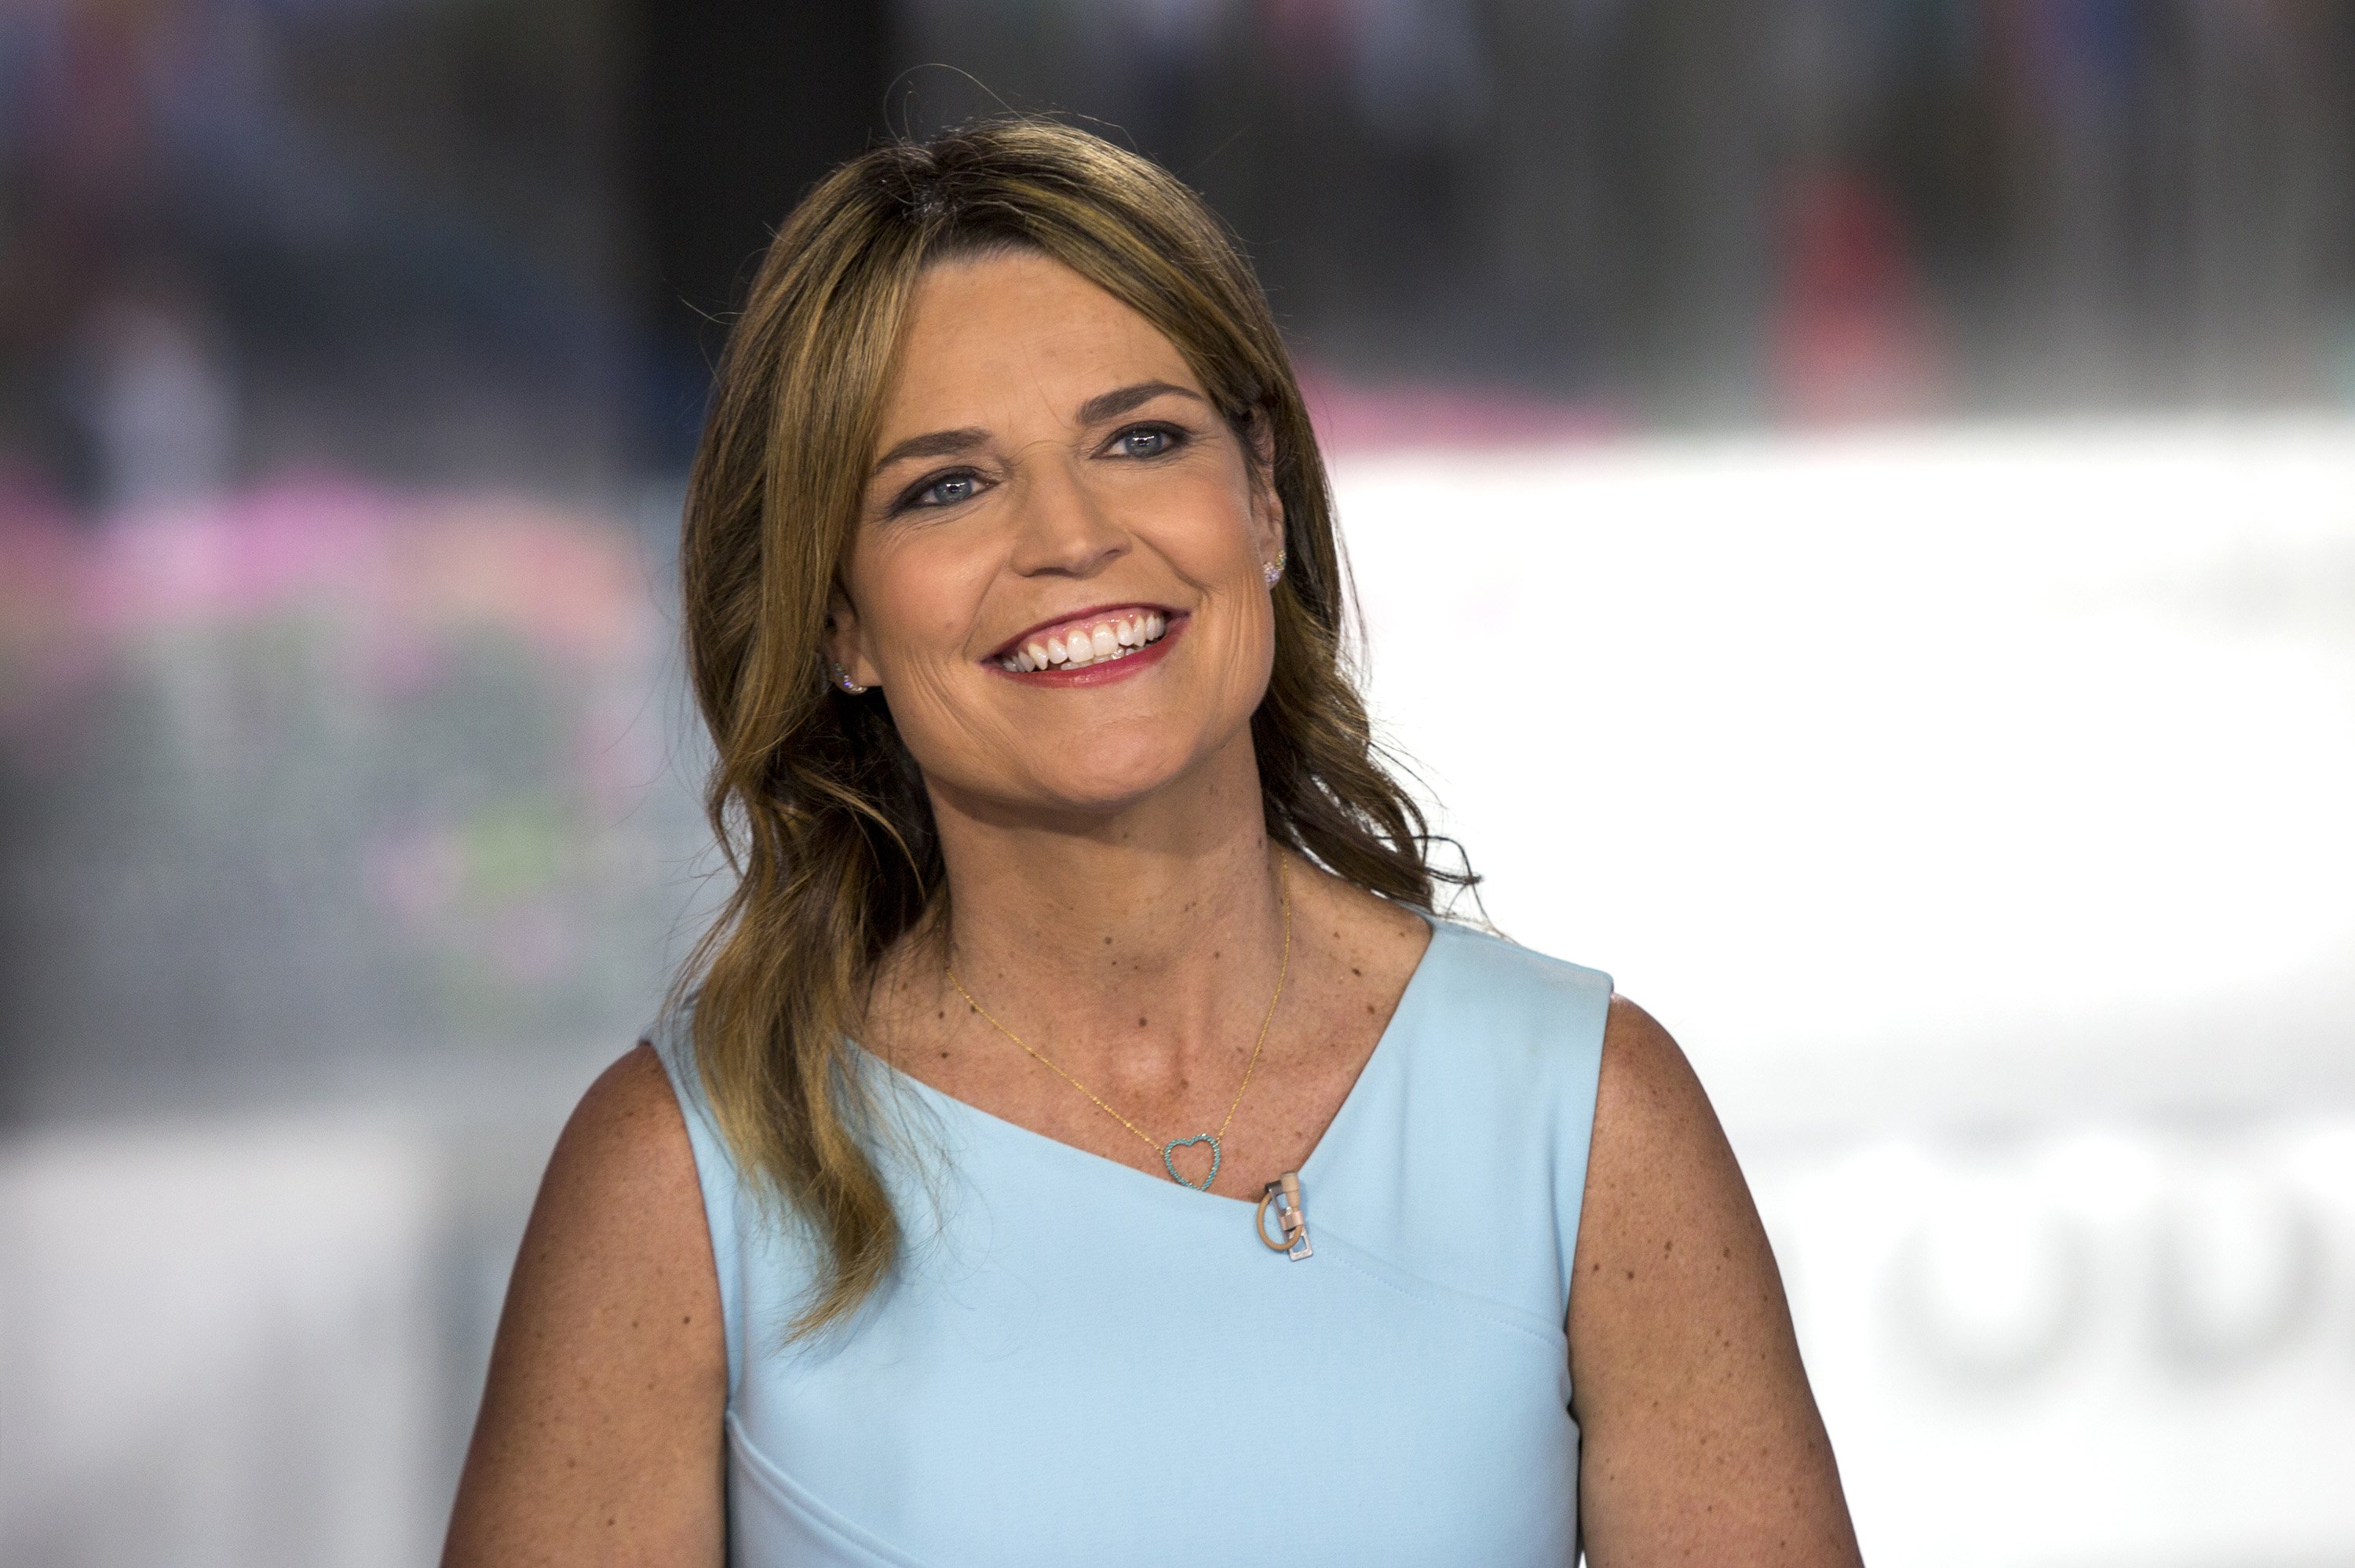 Savannah Guthrie on Season 67 of the Today Show, 2018 | Photo: Getty Images